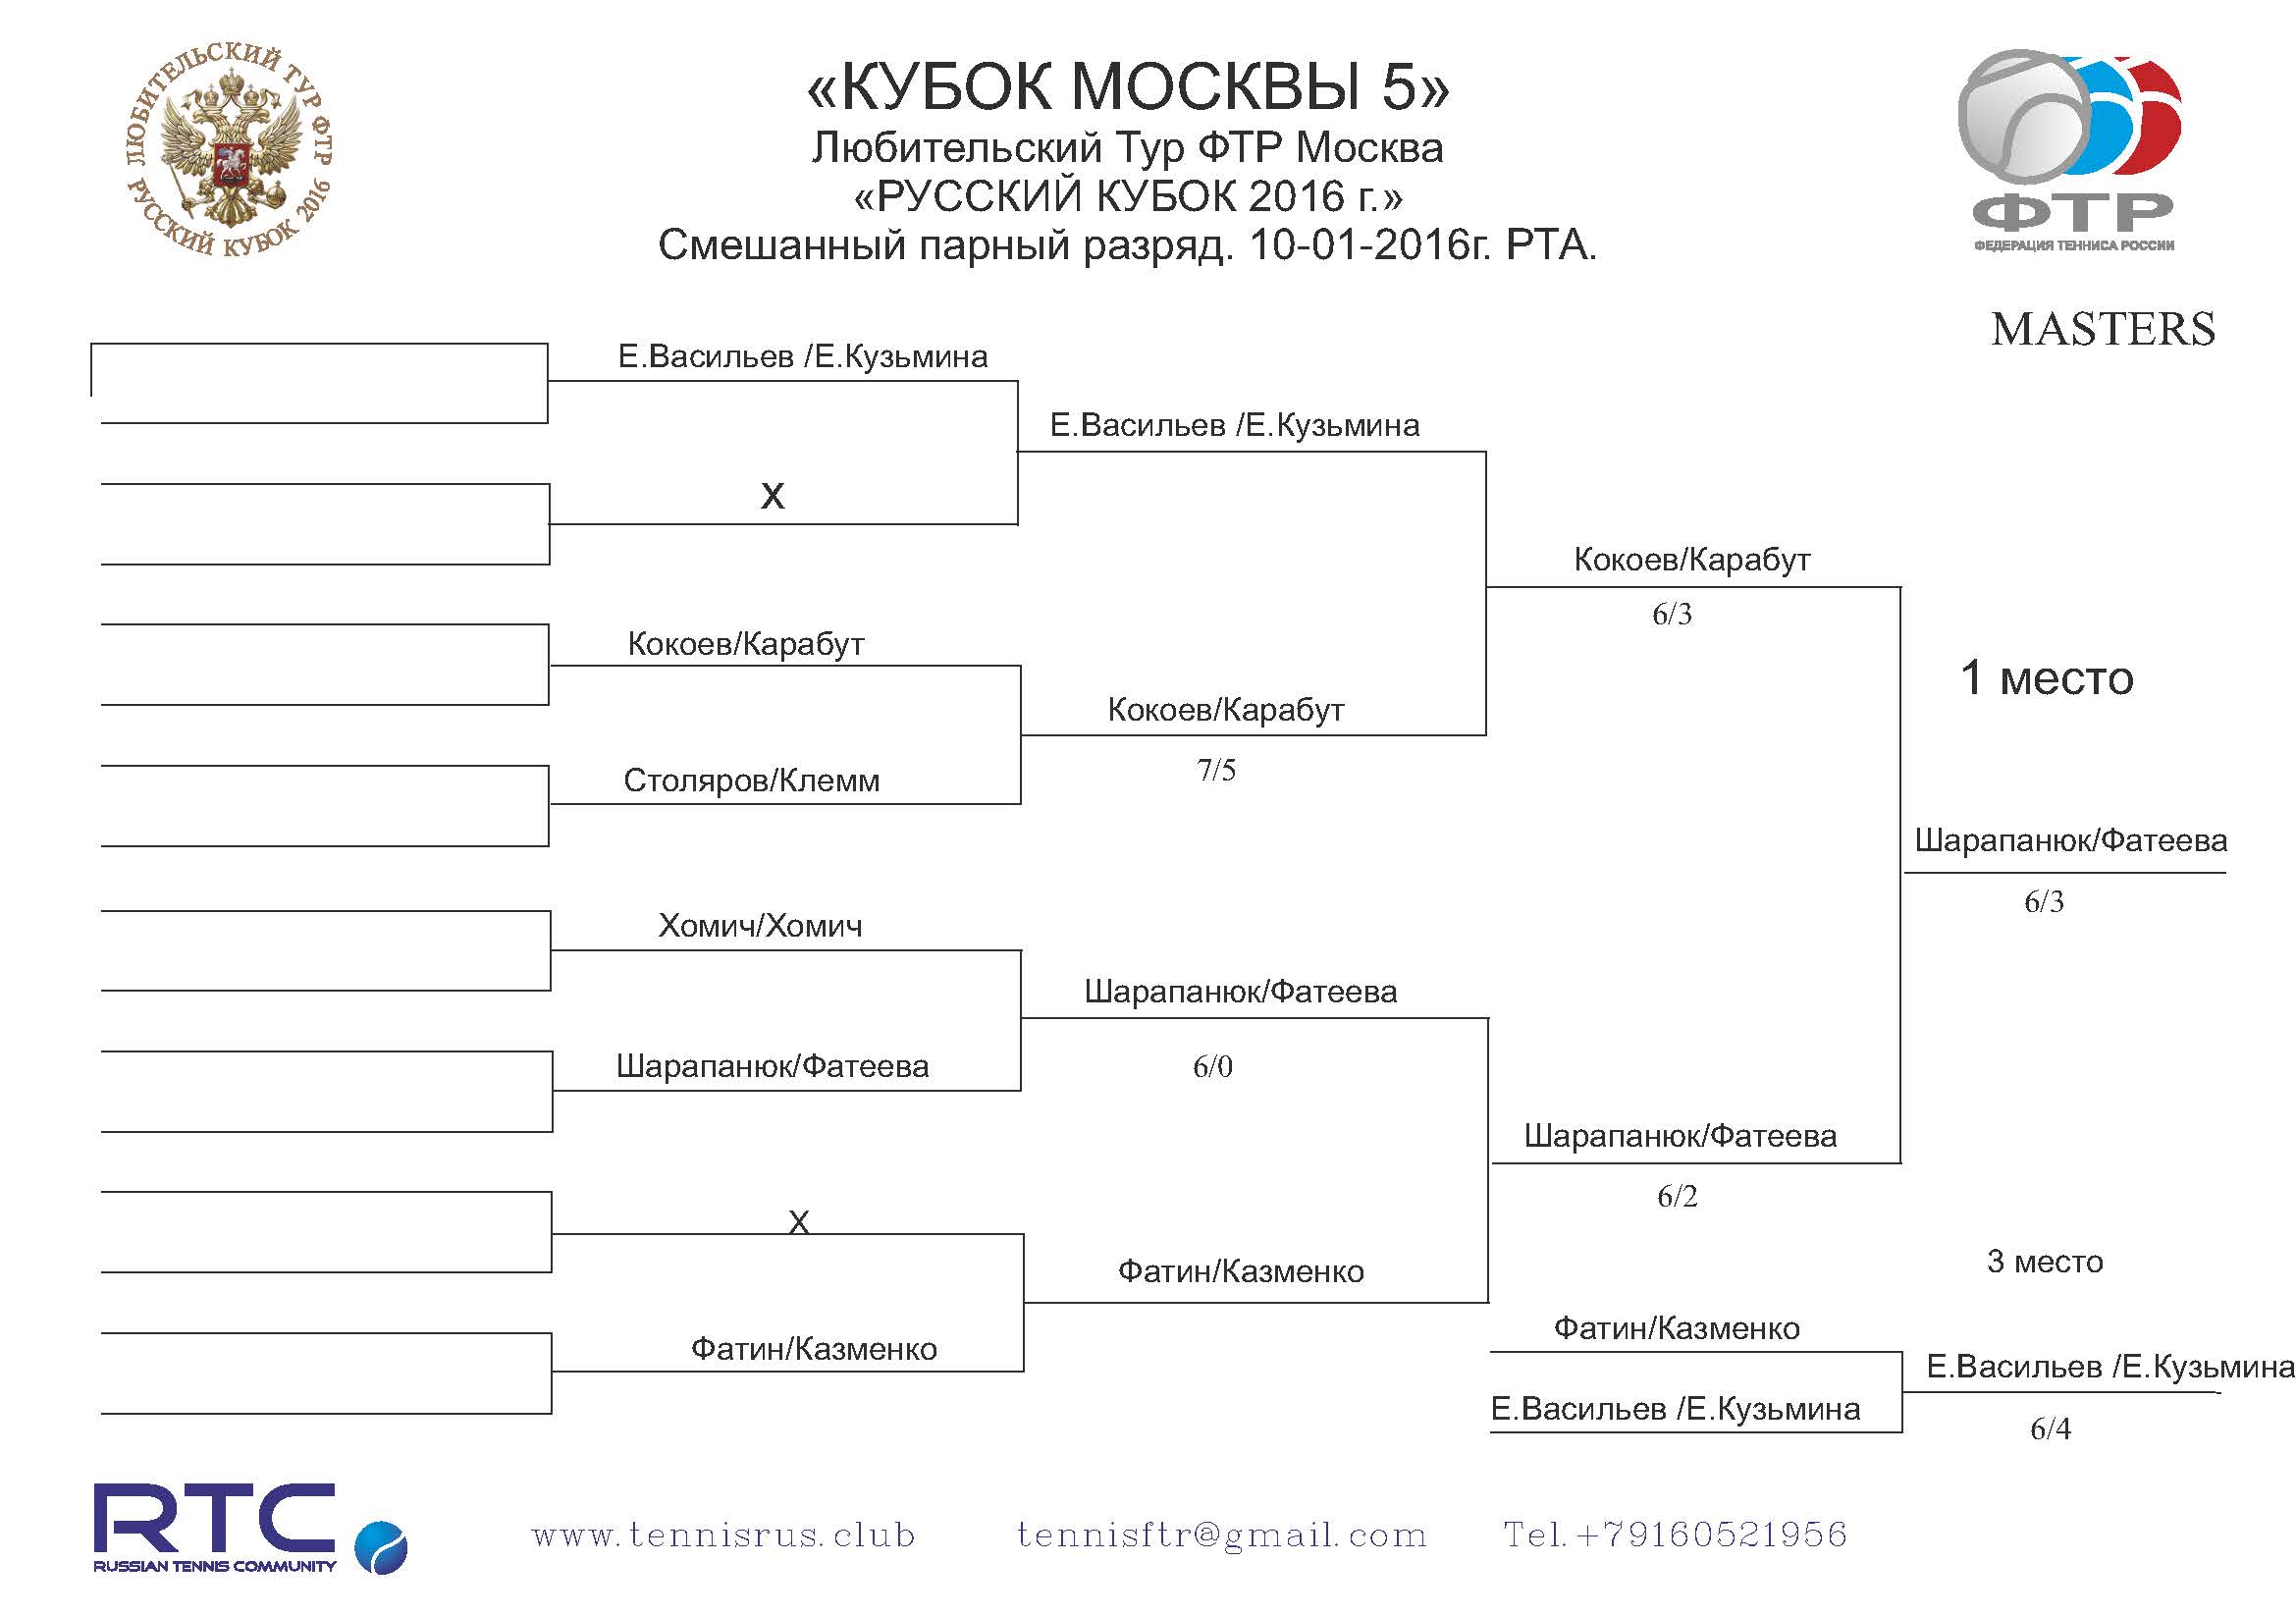 Moscow Cup 5 Masters NET main